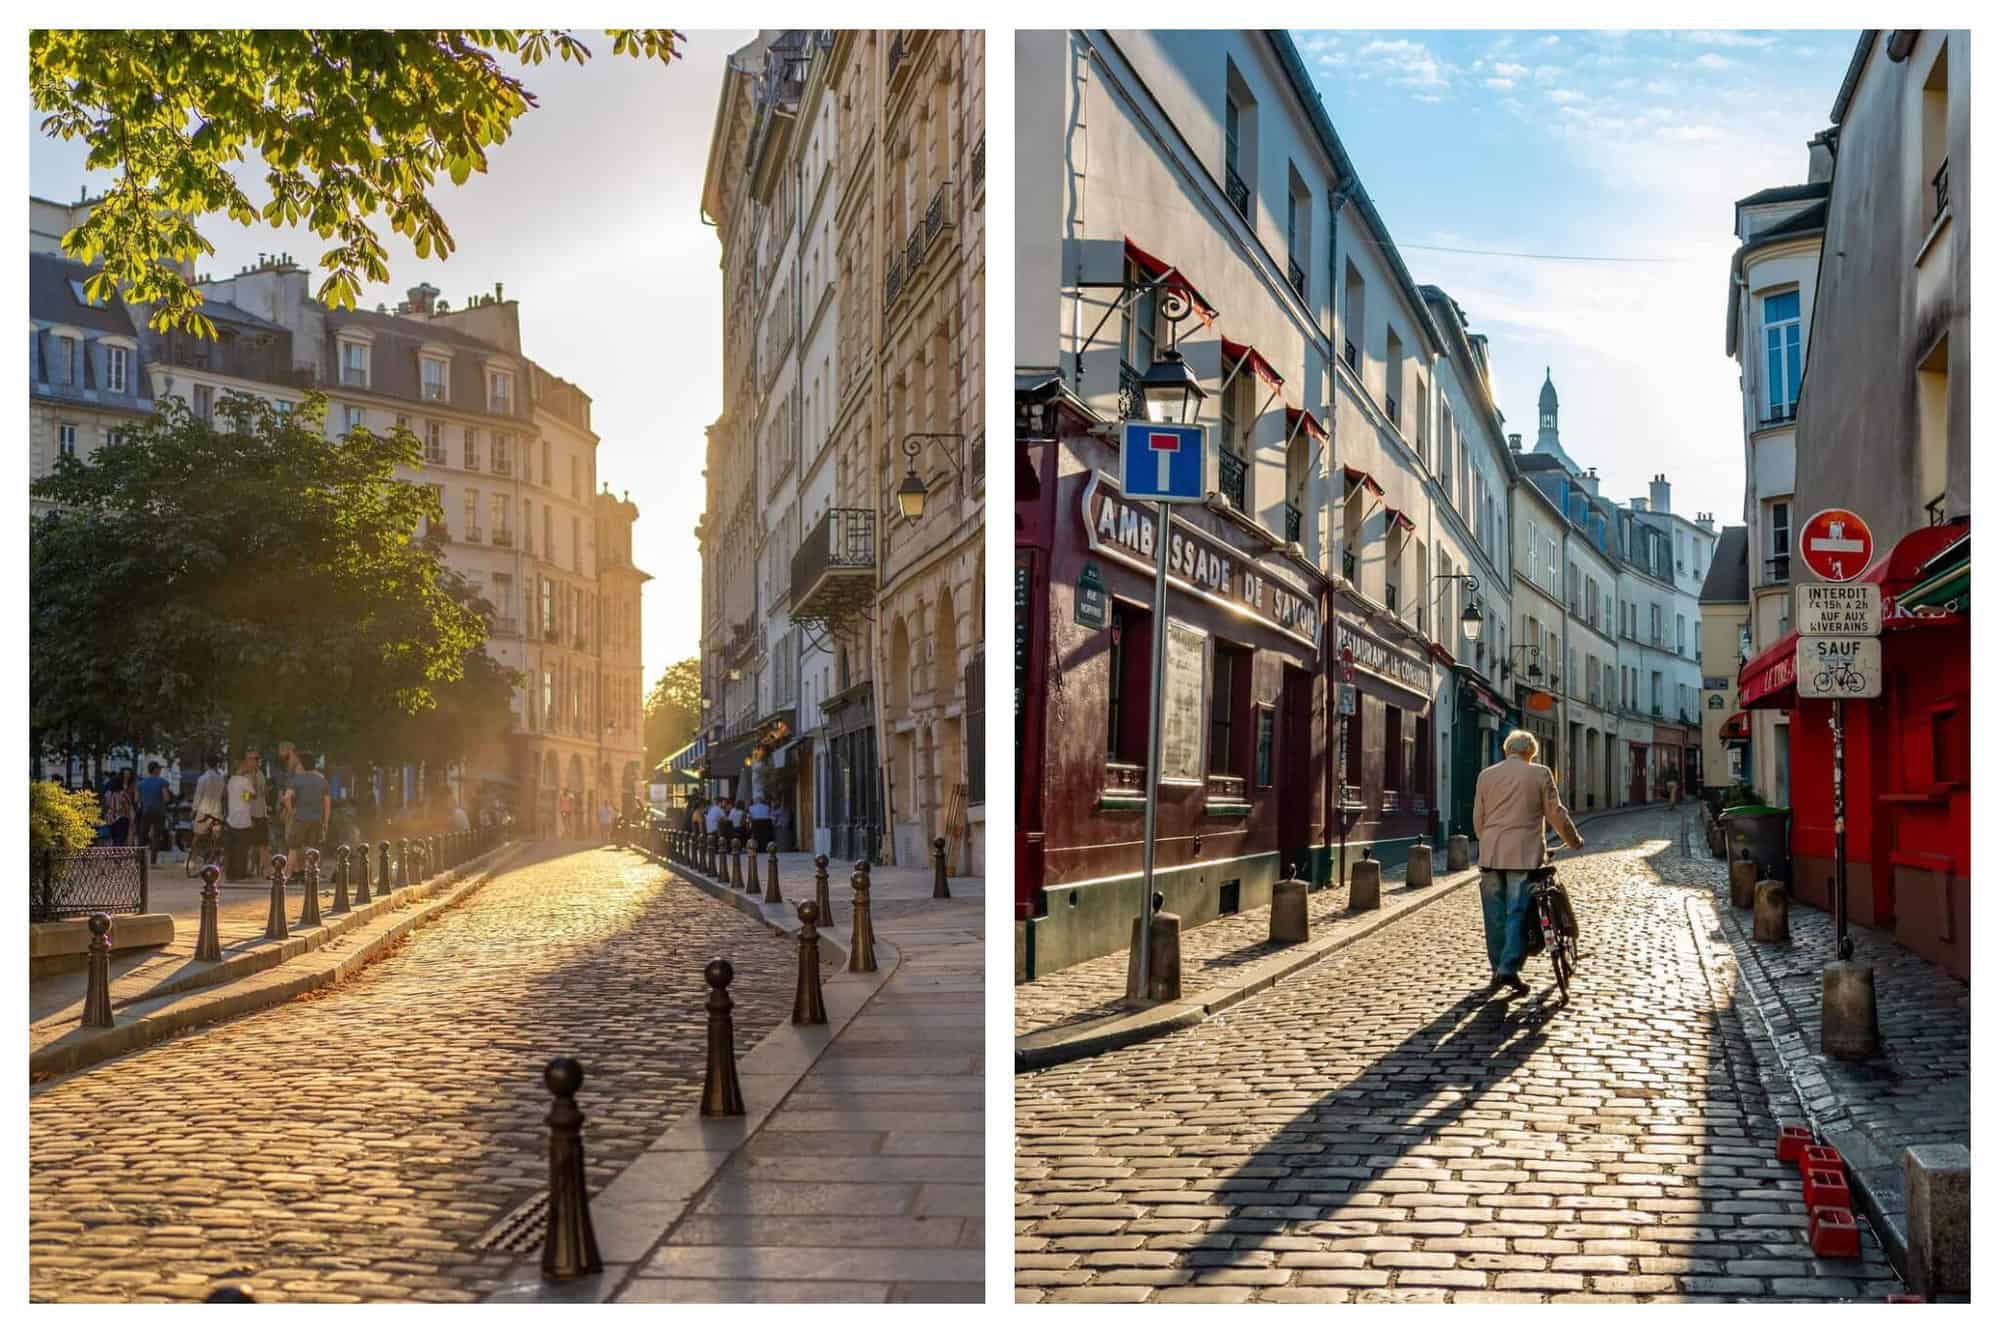 Left: a street in Paris at sunset during the summer. The street is cobblestoned and there is a small park visible to the left with people gathered. There are several trees visible as well as buildings. Right: A man walking up an empty street in Paris with his bike. The sun is shining brightly and it looks like early morning. There are several shops on the street.